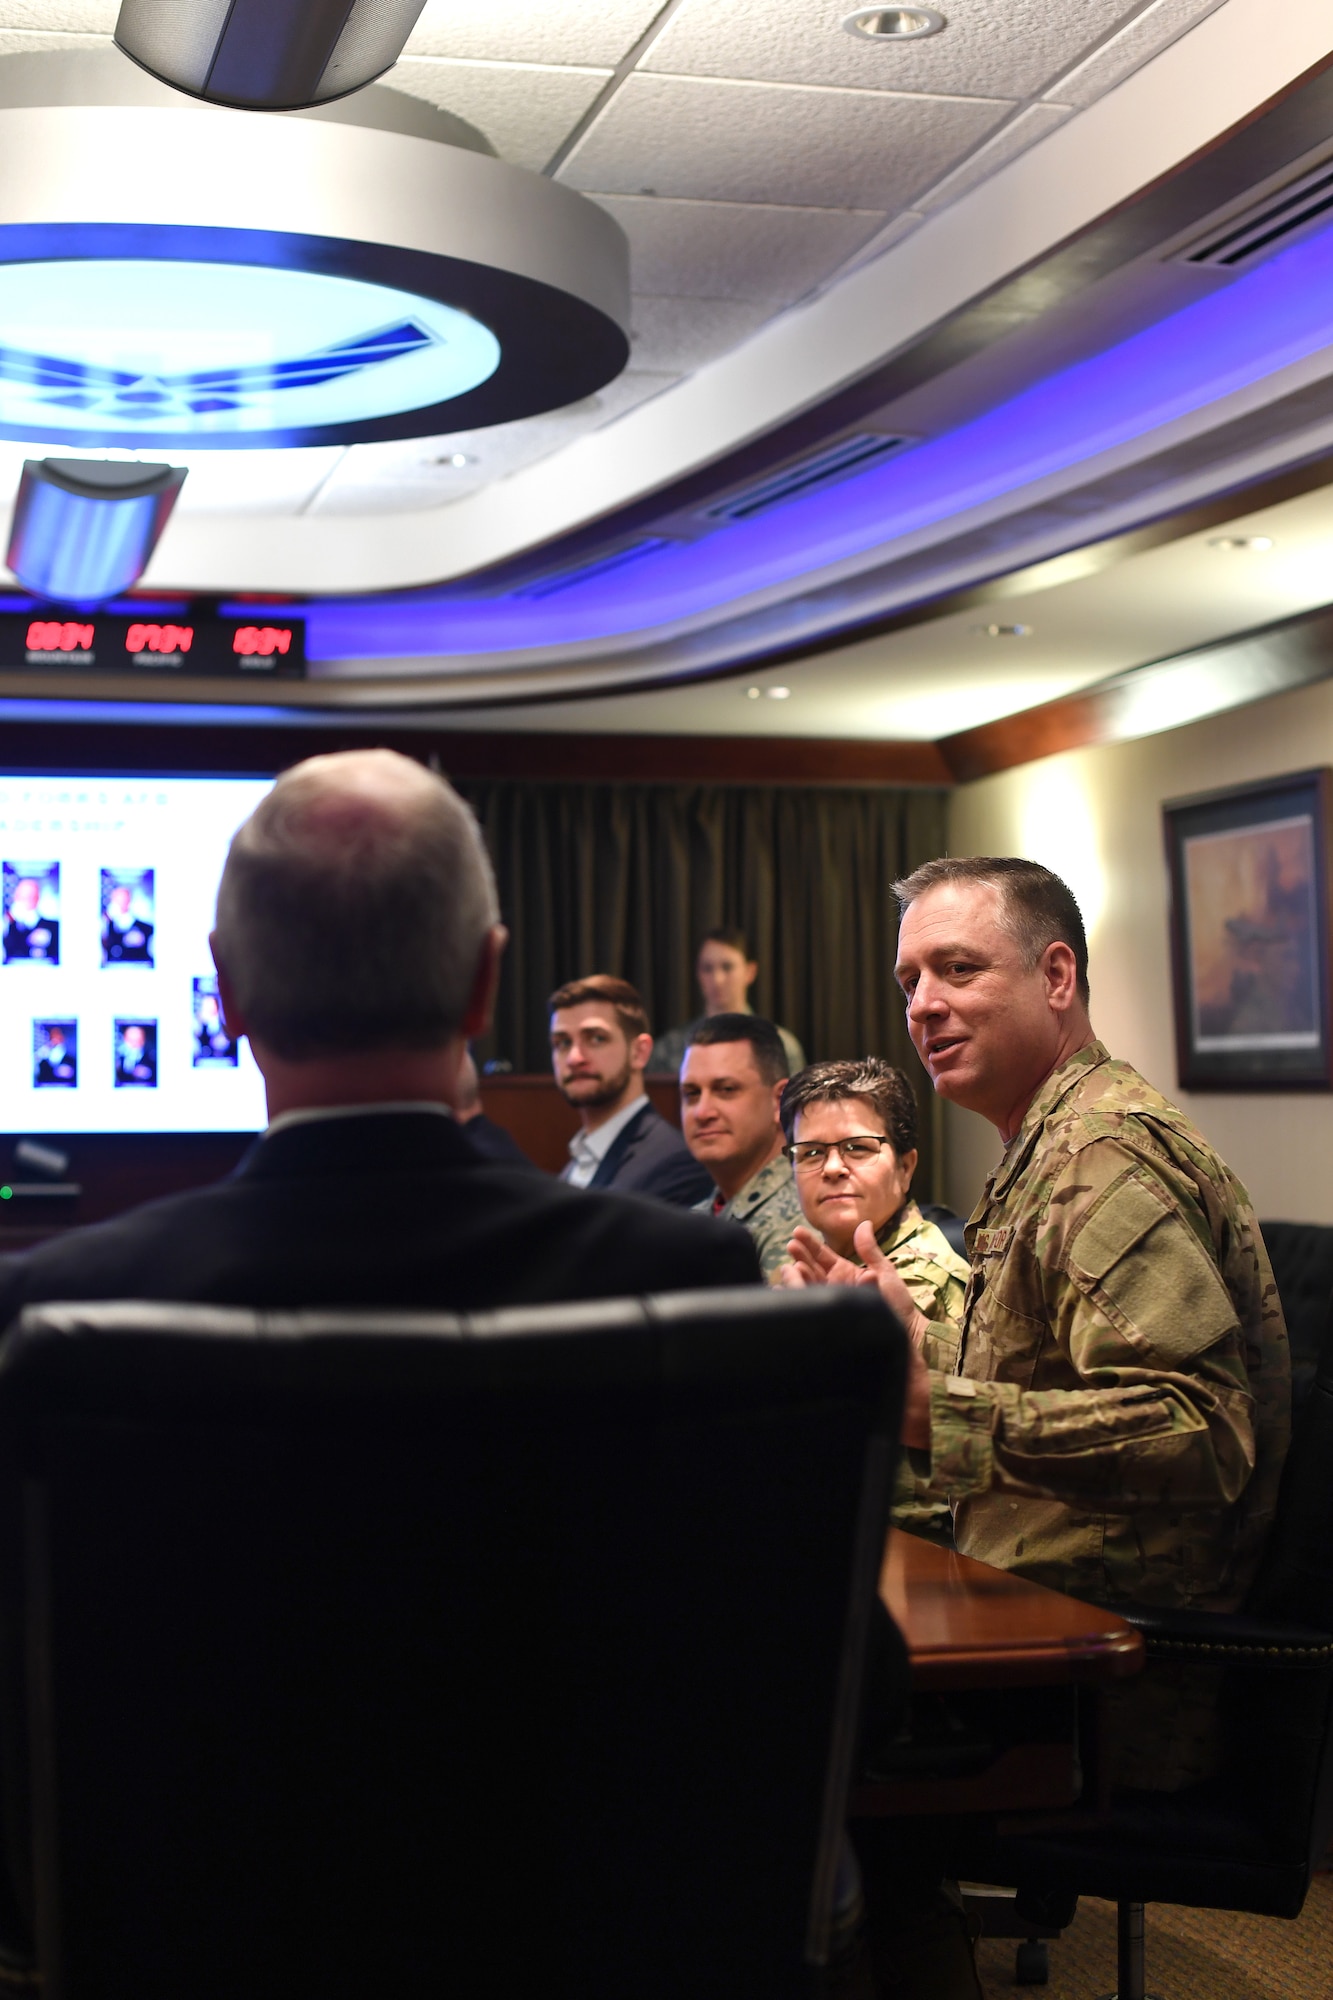 Col. Benjamin Spencer, 319th Air Base Wing commander, provides a mission in-brief to Senator Kevin Cramer February 22, 2019, on Grand Forks Air Force Base, North Dakota. The brief included current data about the base and its priorities to improve squadron readiness, build leaders and bring the future with innovation. (U.S. Air Force photo by Senior Airman Elora J. Martinez)